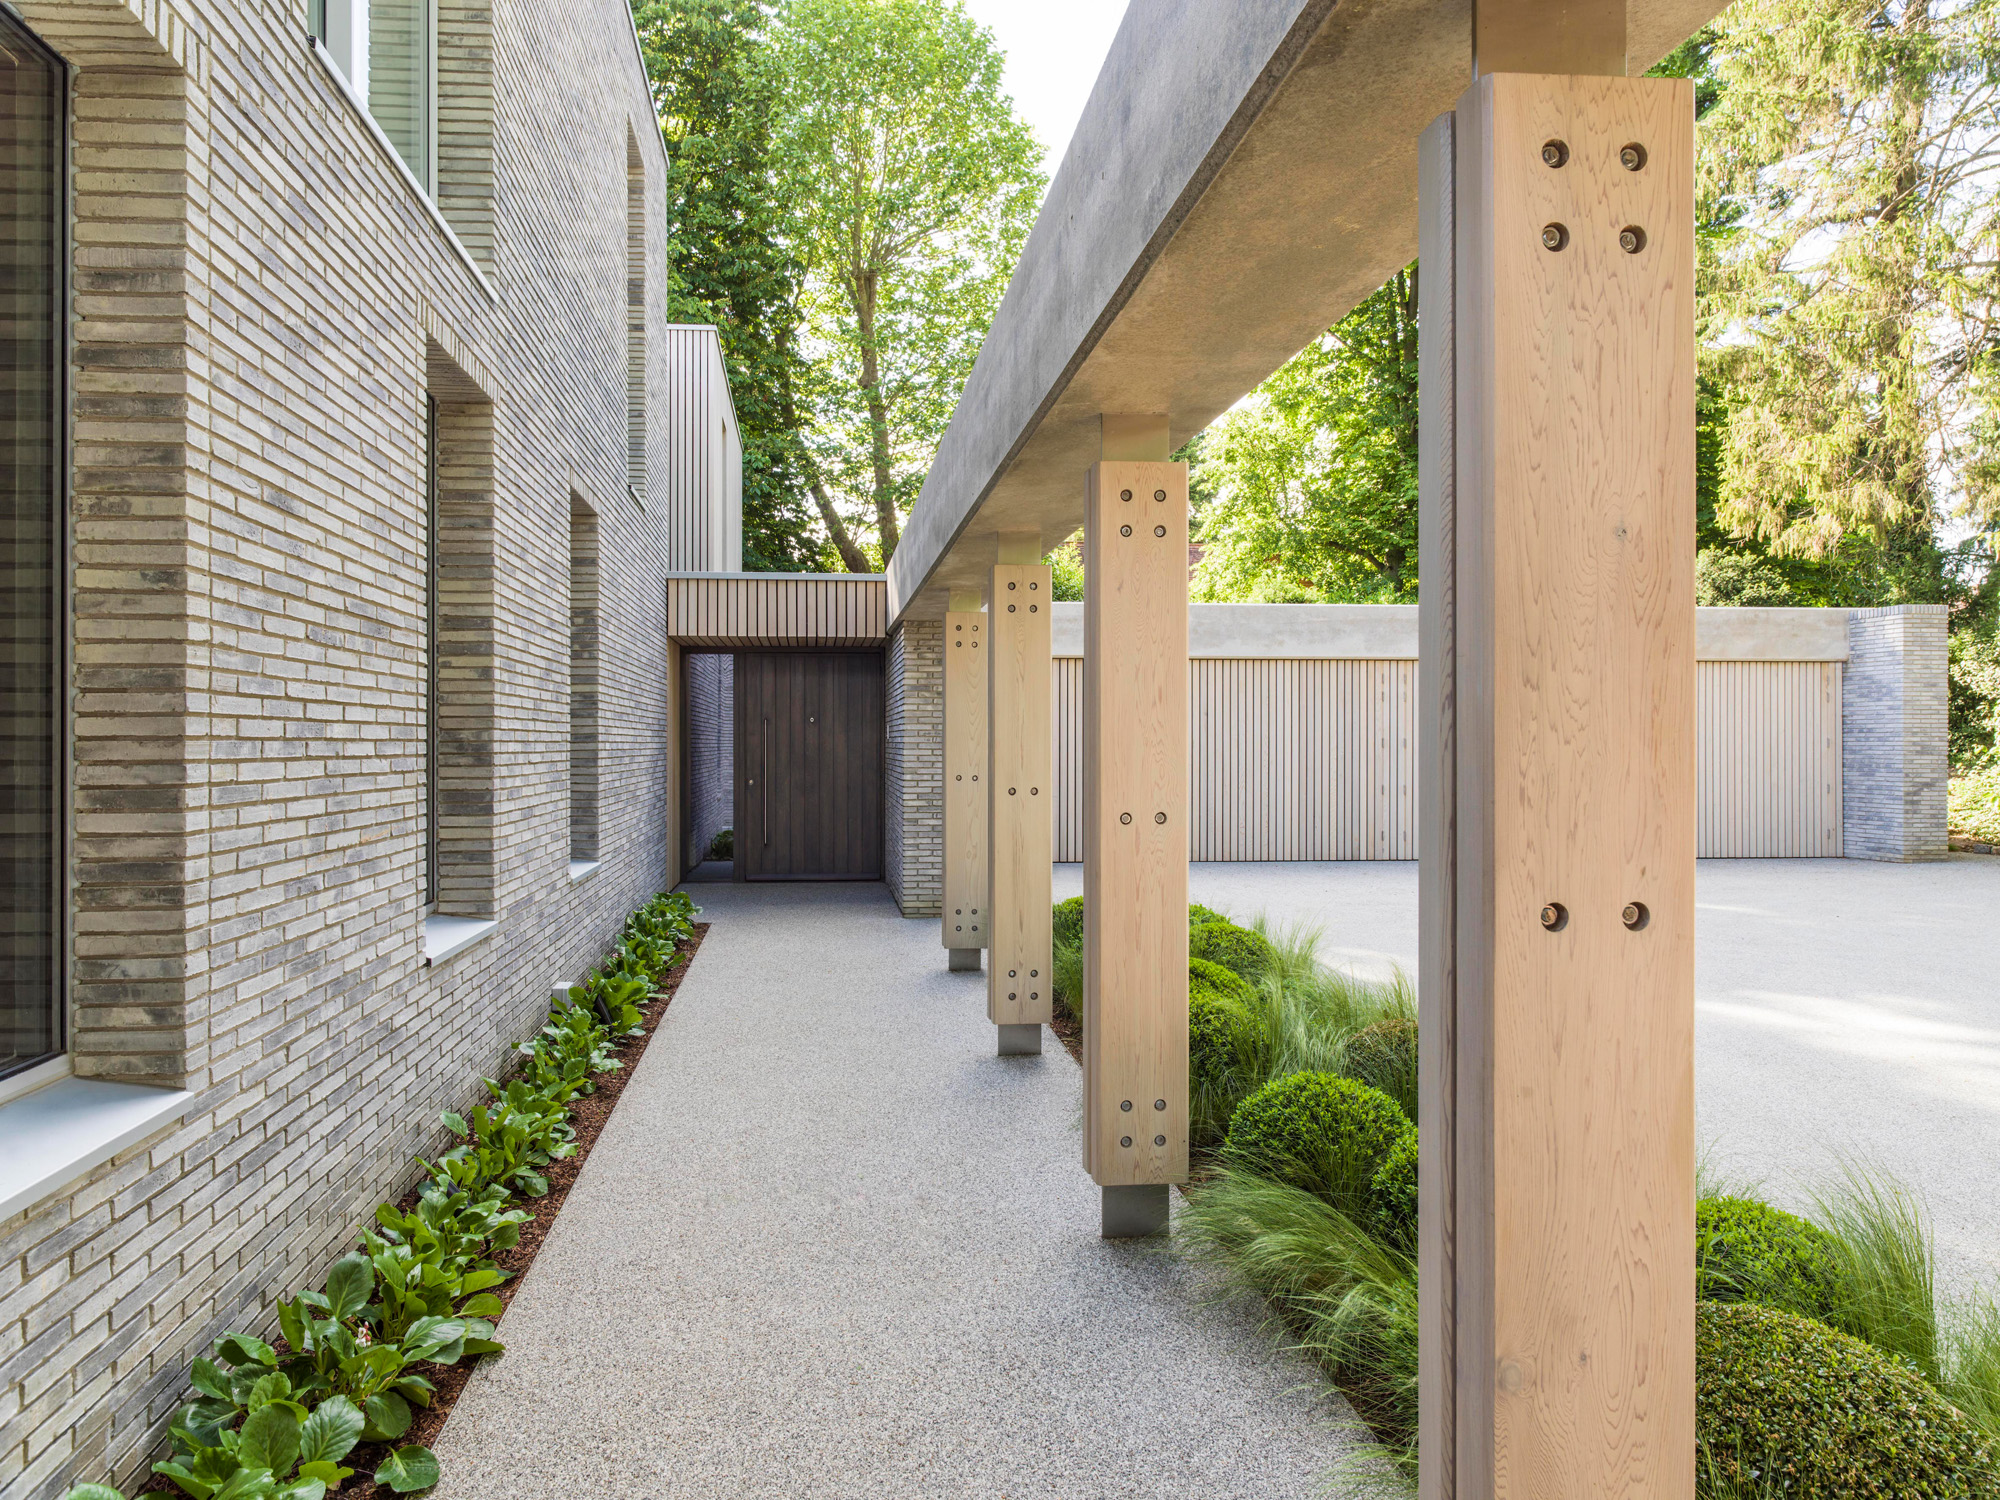 Garden at Caversham by Gregory Phillips Architects - luxury architects in London